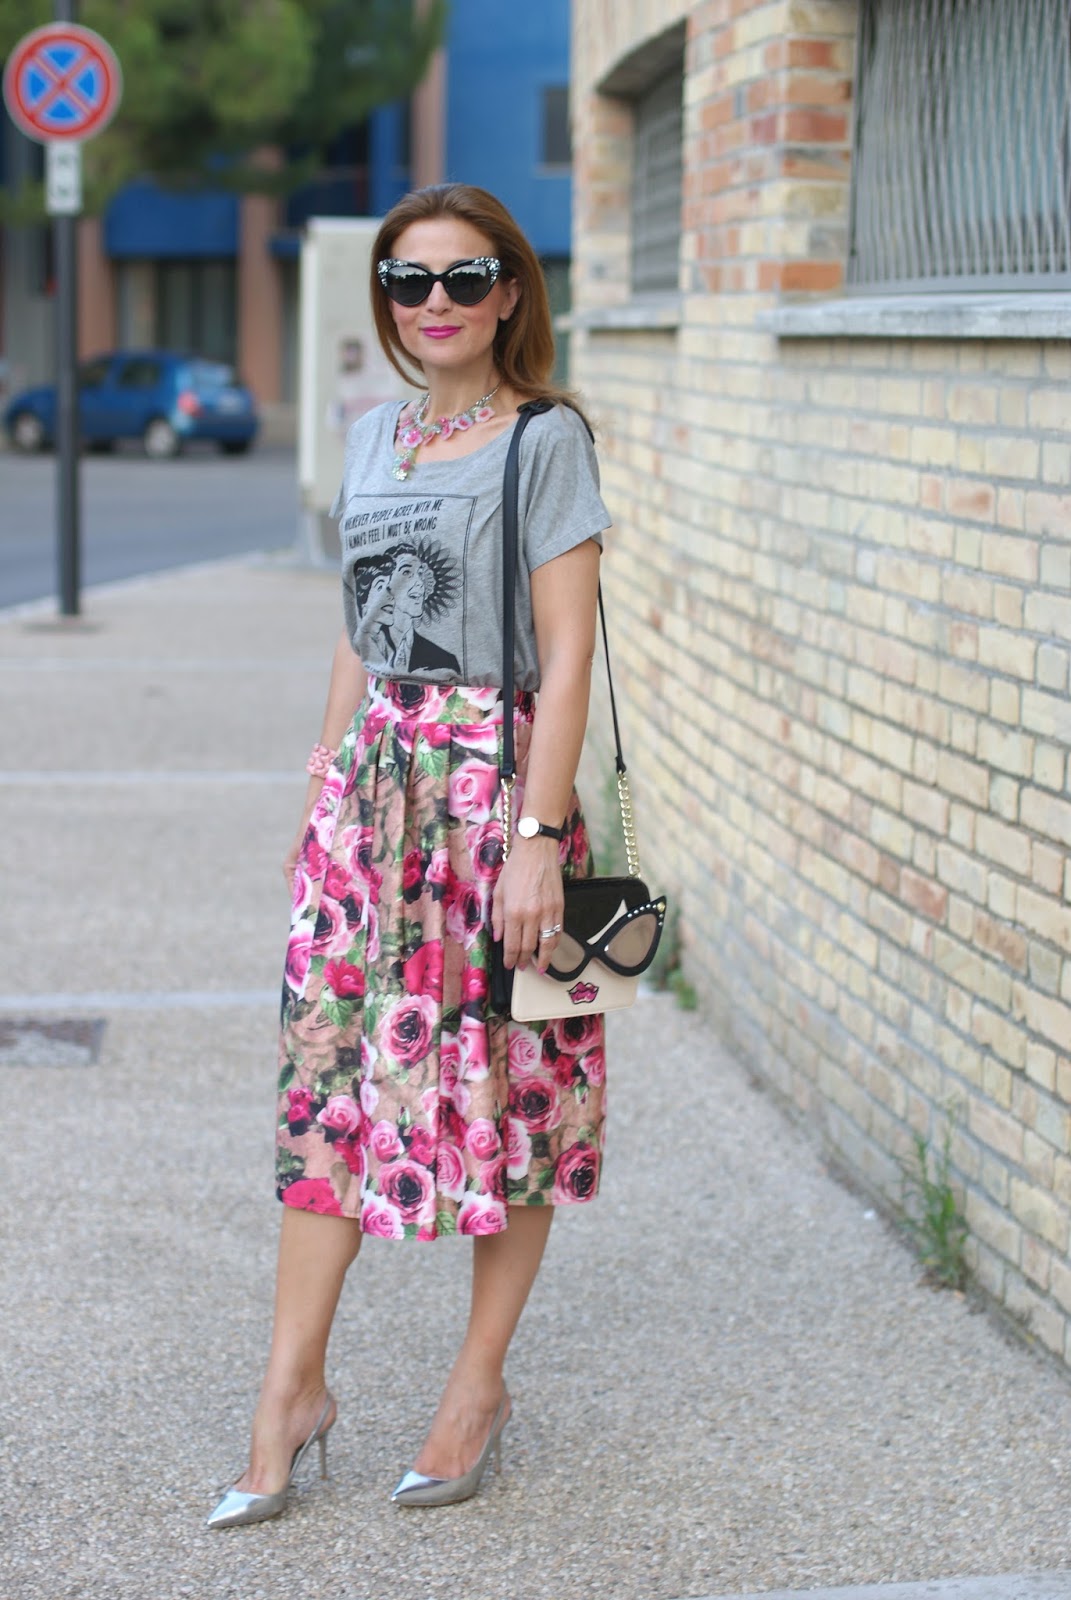 Opposes Complementaires t-shirt con midi skirt con rose e borsa Betsey Johnson su Fashion and Cookies fashion blog, fashion blogger style